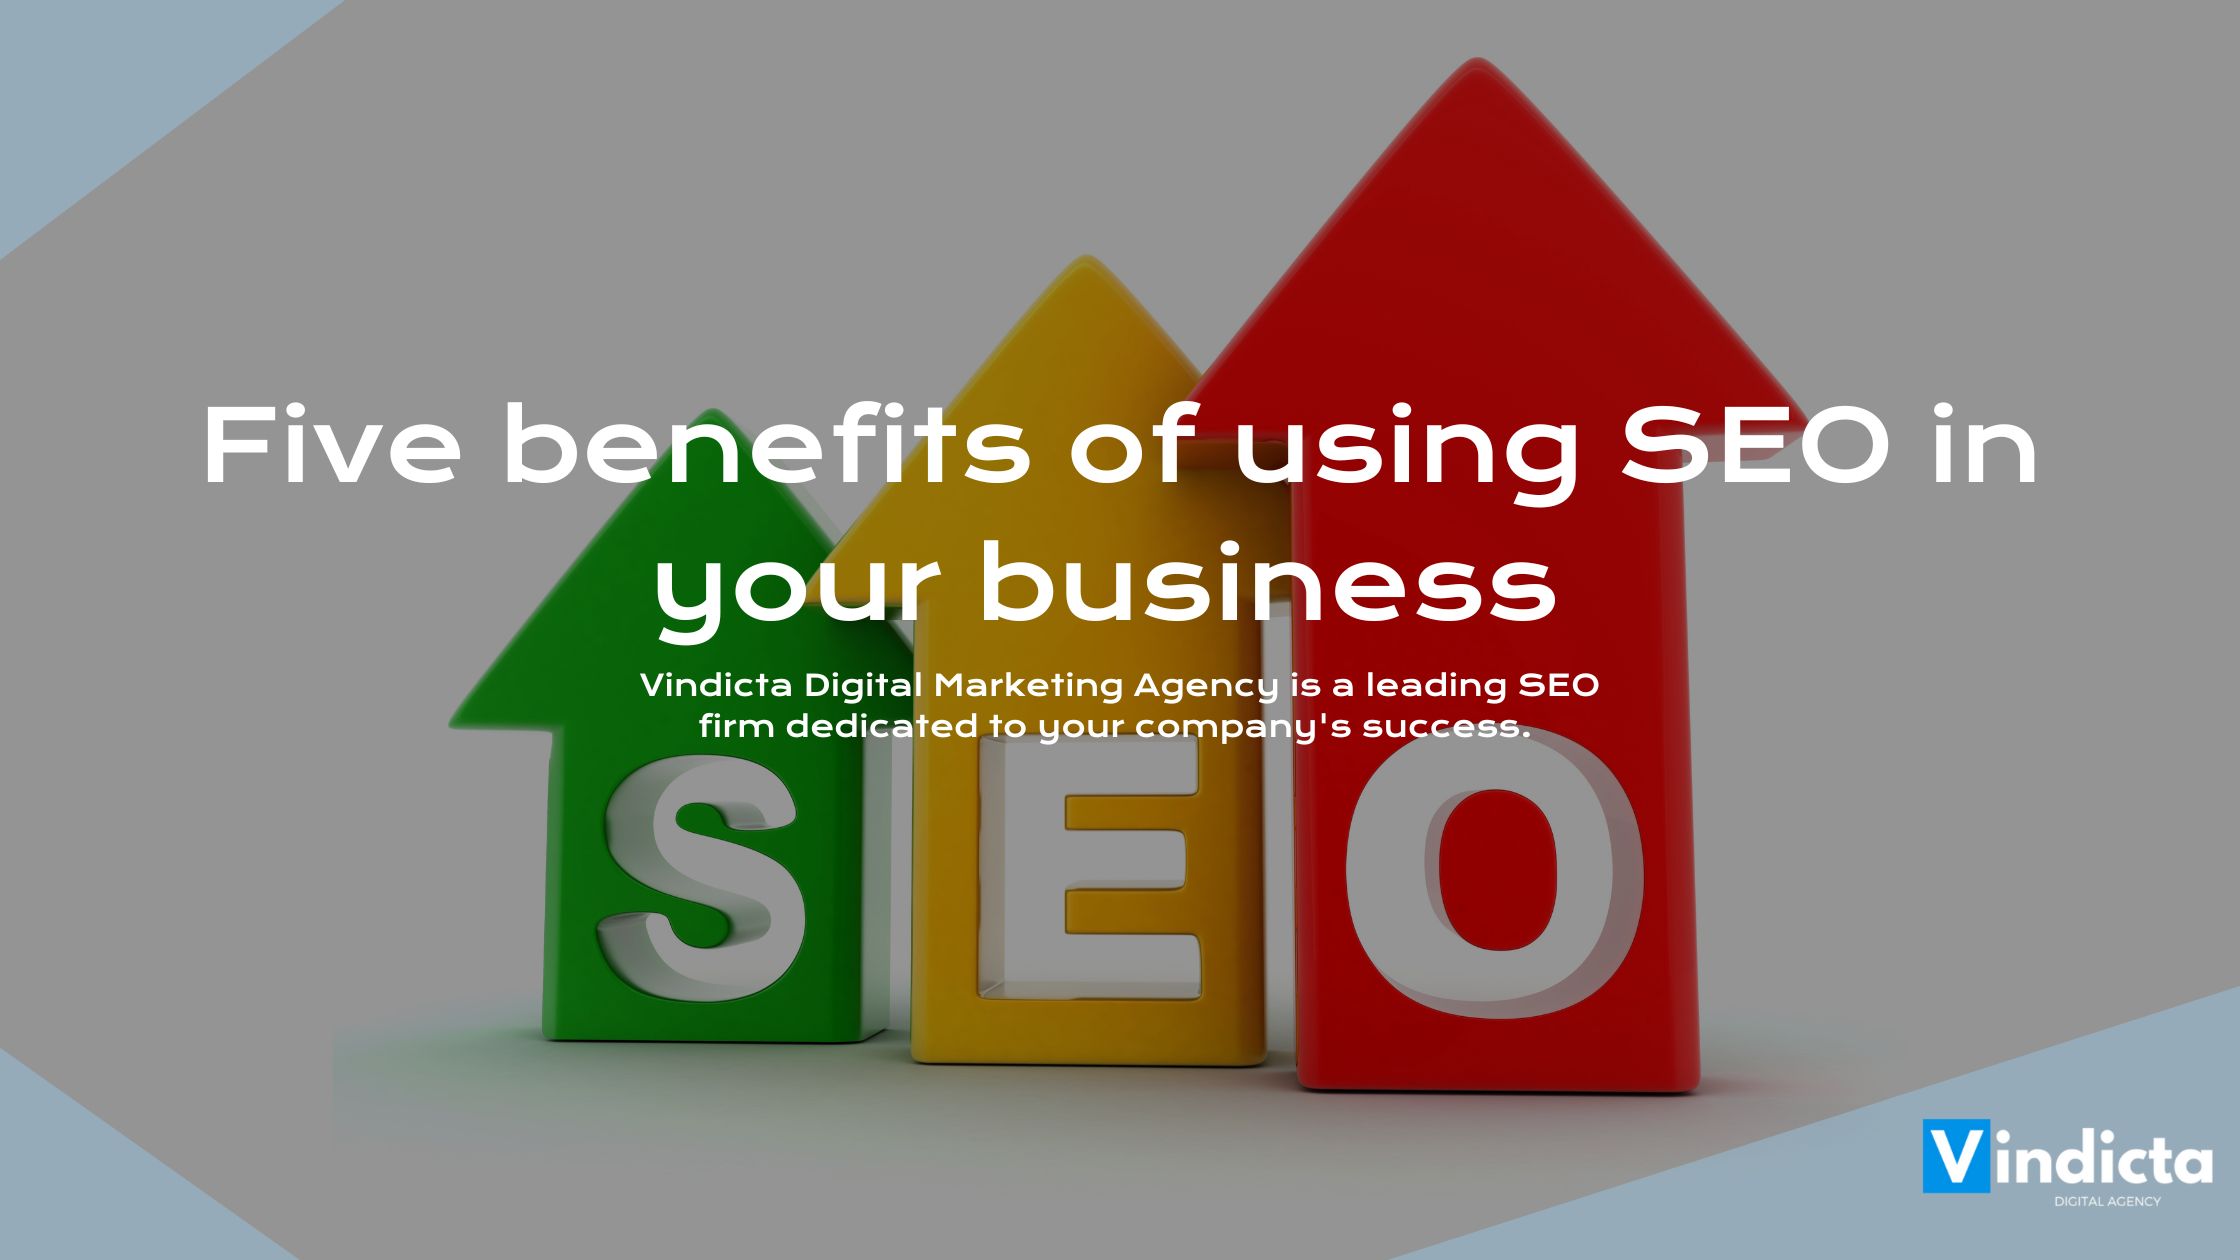 Five benefits of using SEO in your business